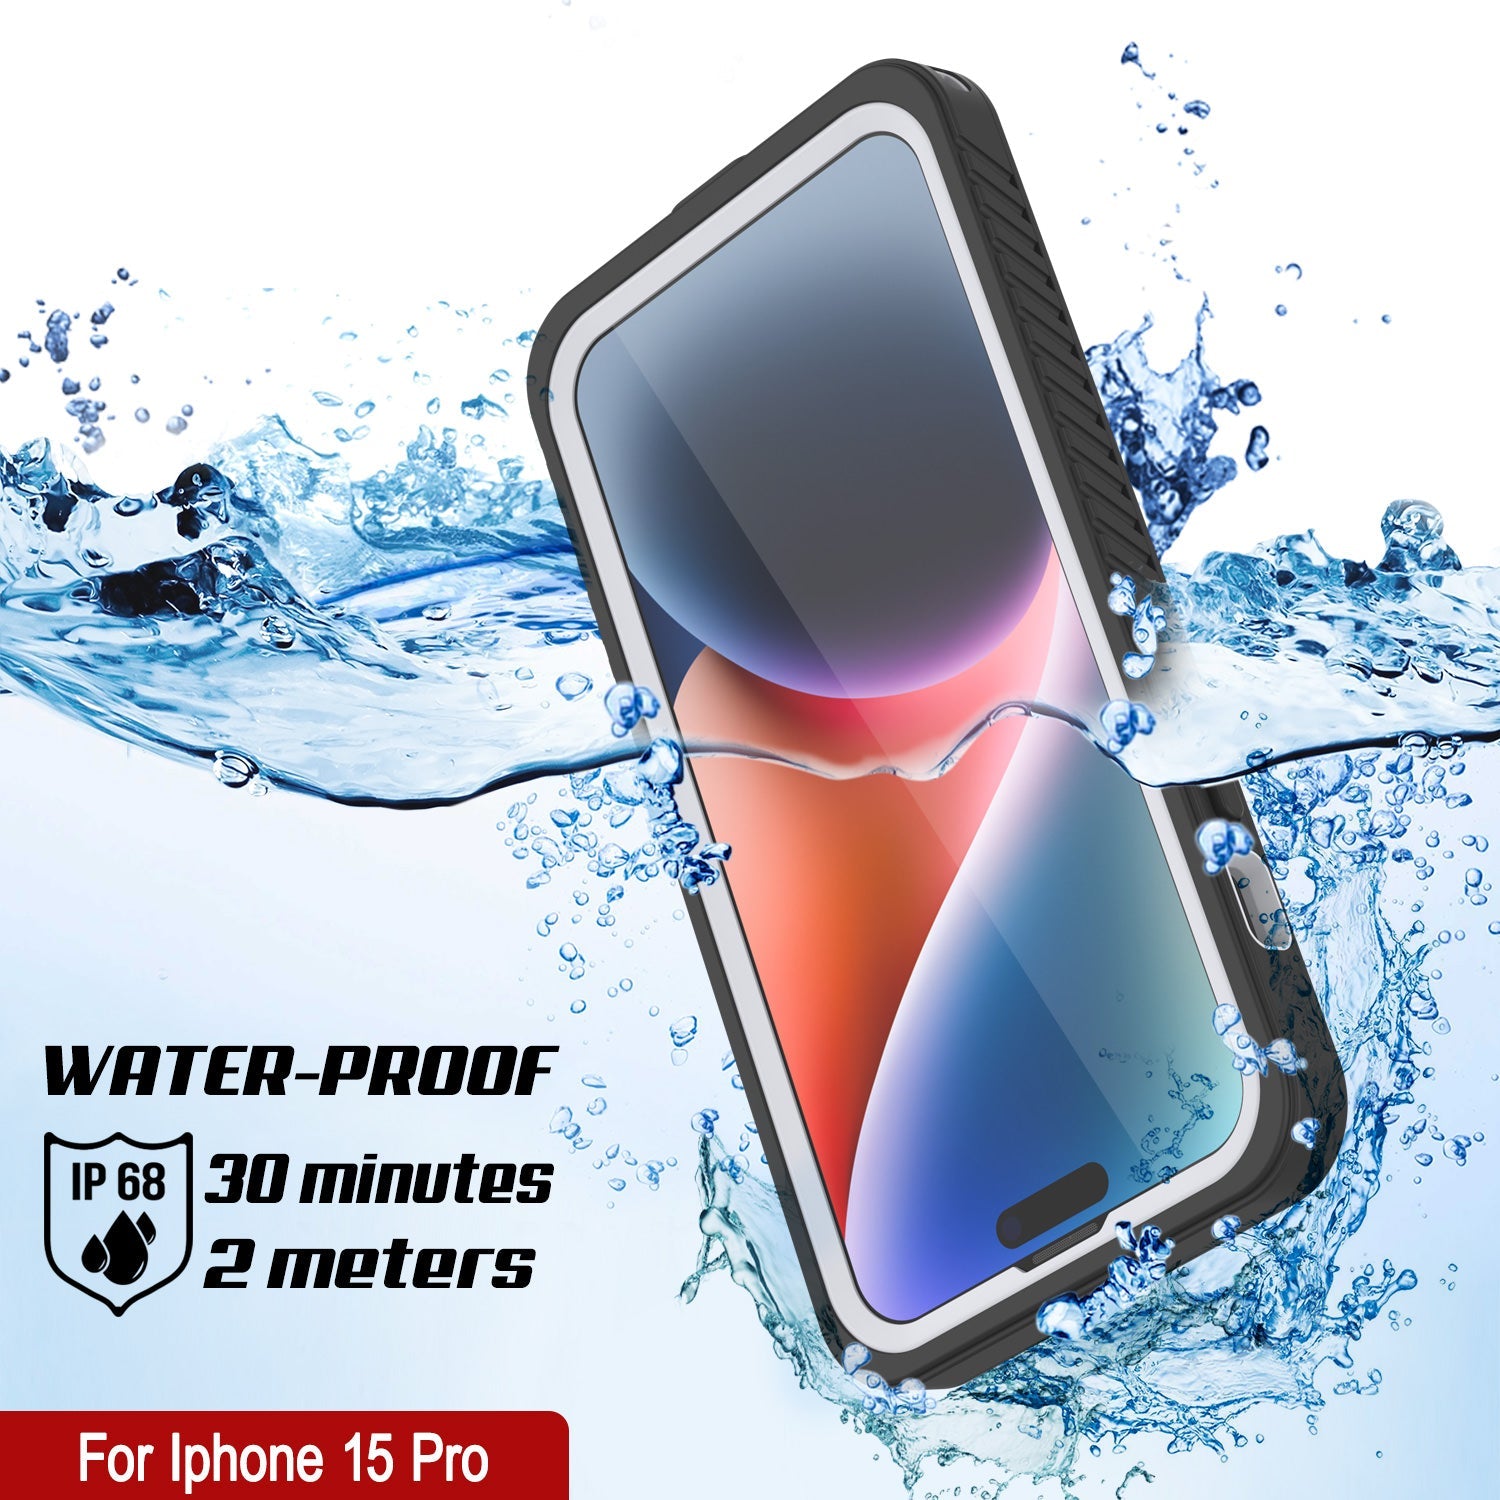 iPhone 15 Pro Waterproof Case, Punkcase [Extreme Series] Armor Cover W/ Built In Screen Protector [White]